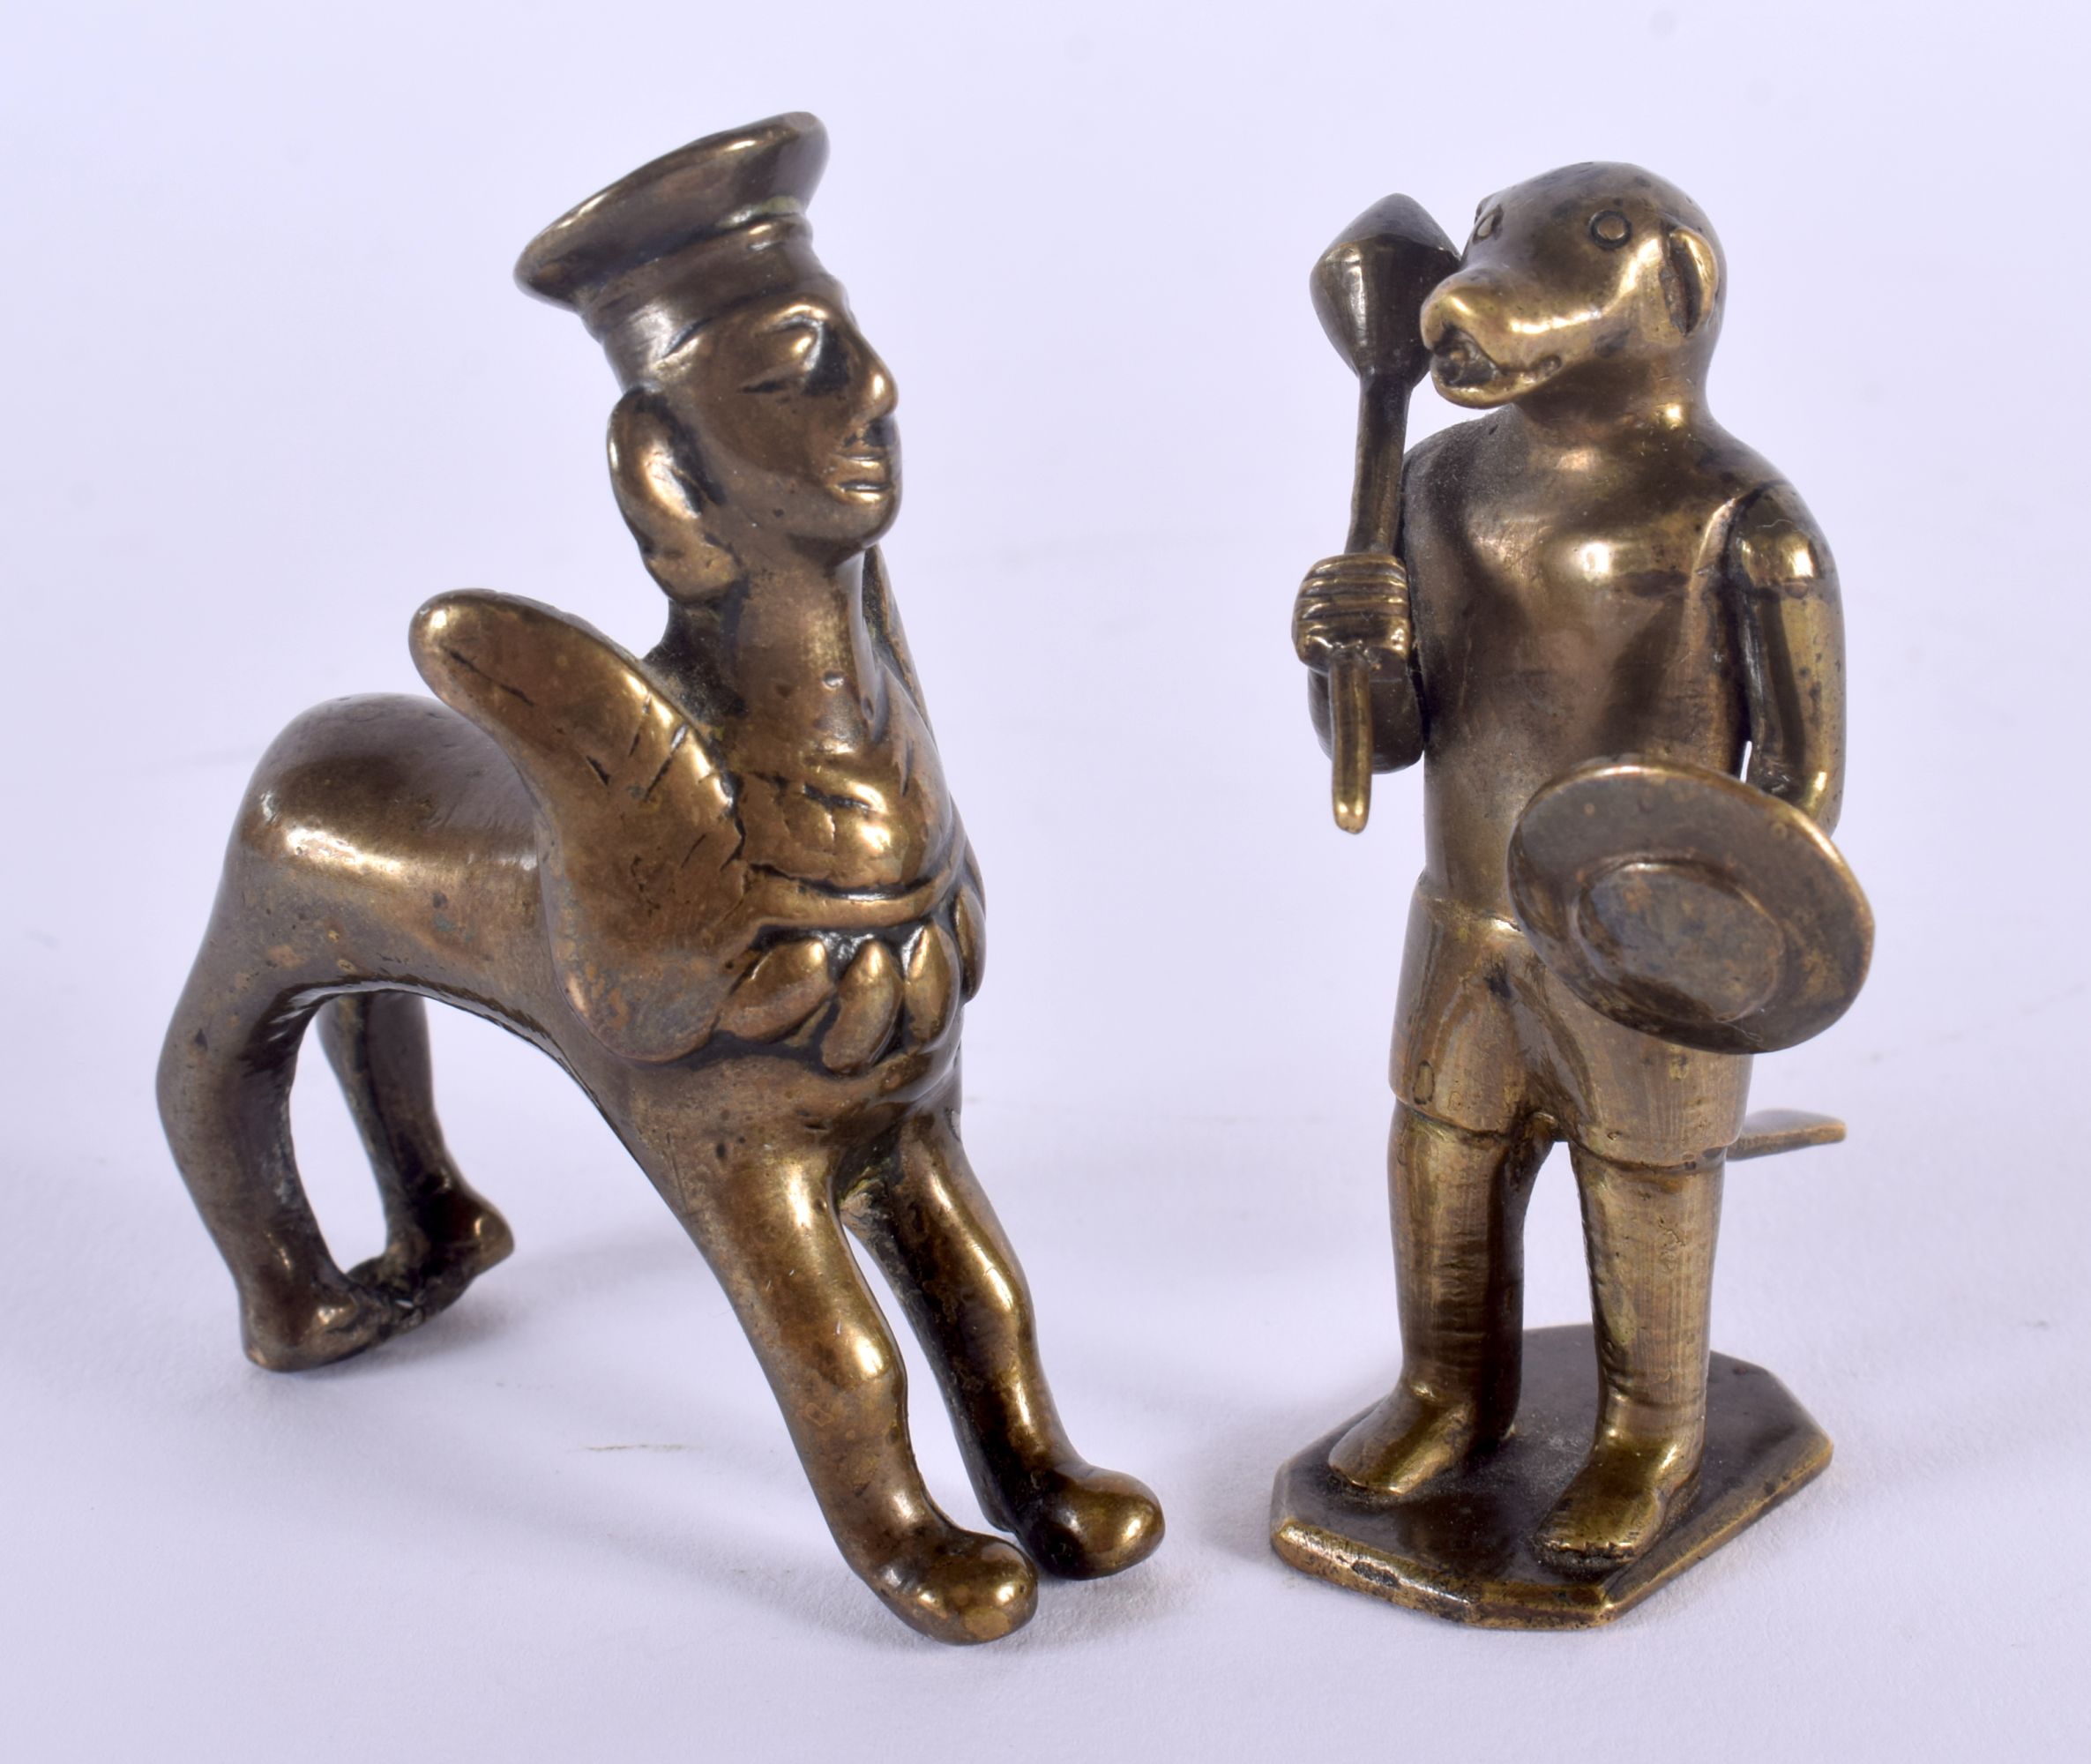 TWO 18TH CENTURY INDIAN BRONZE FIGURES modelled as a monkey god and another. Largest 7 cm x 5 cm. (2